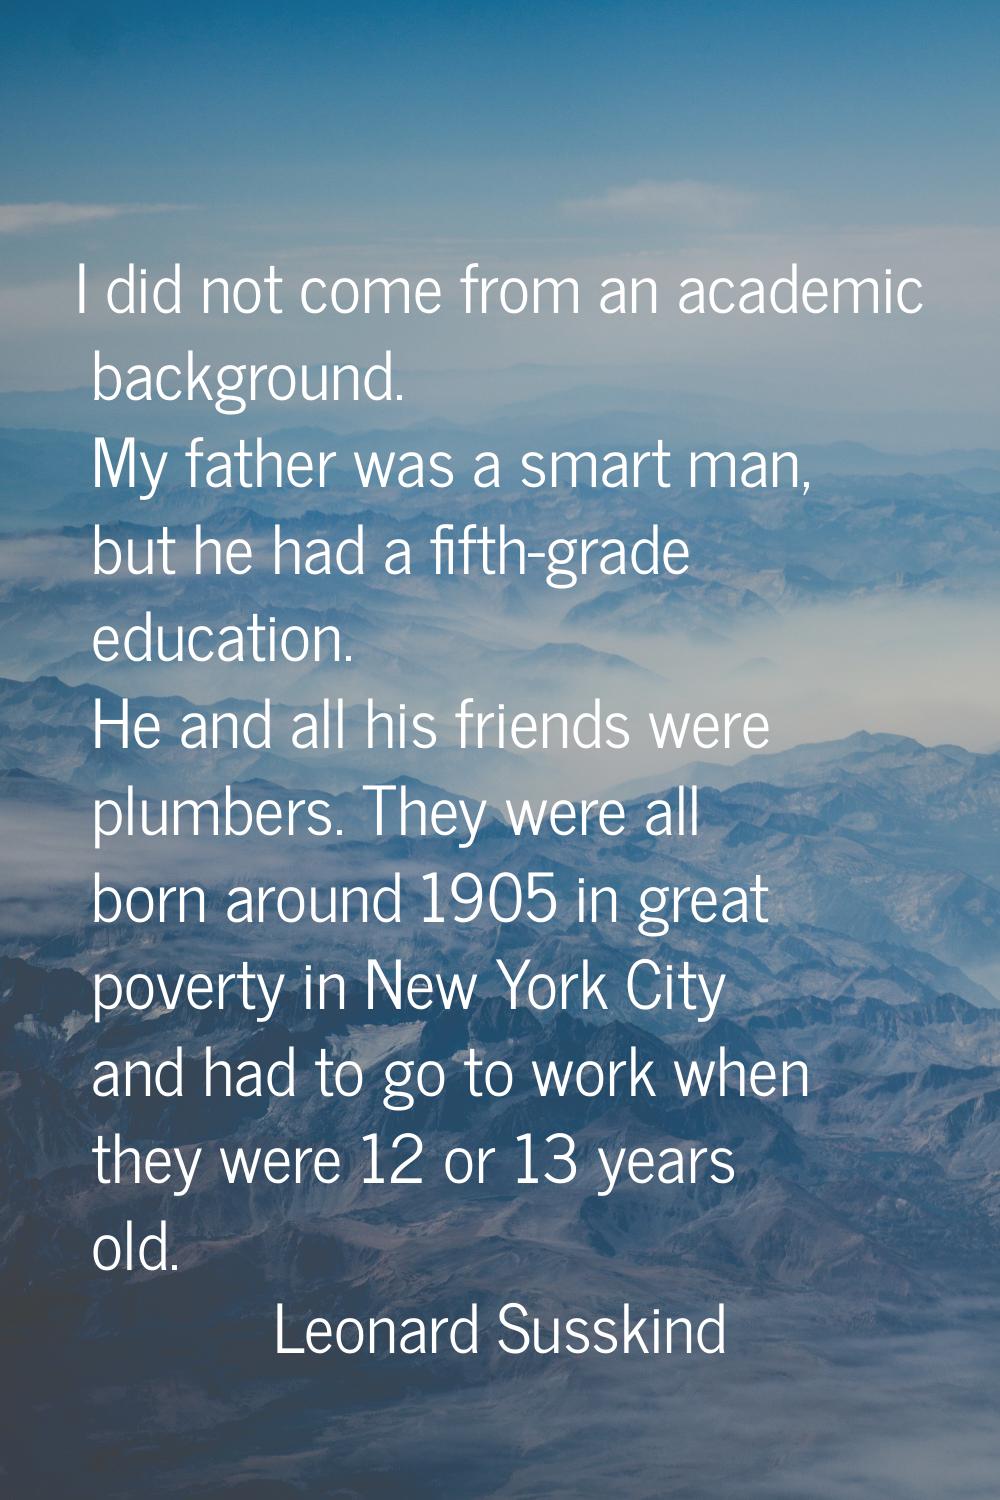 I did not come from an academic background. My father was a smart man, but he had a fifth-grade edu